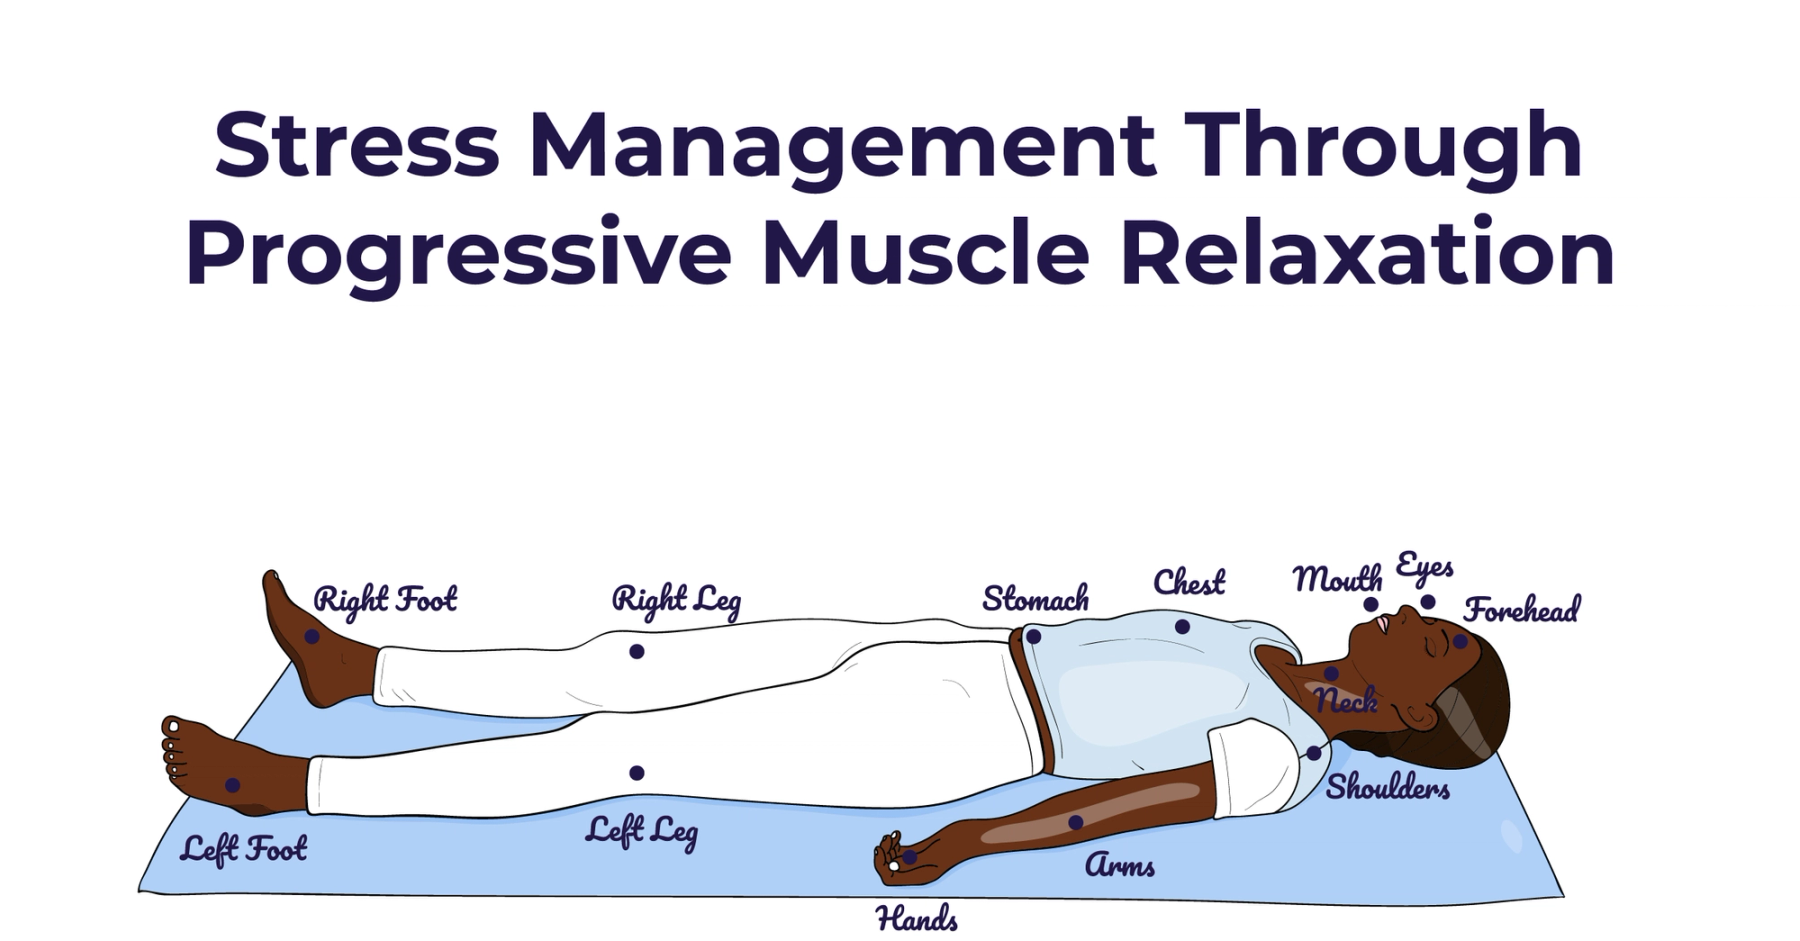 Stress Management Through Progressive Muscle Relaxation